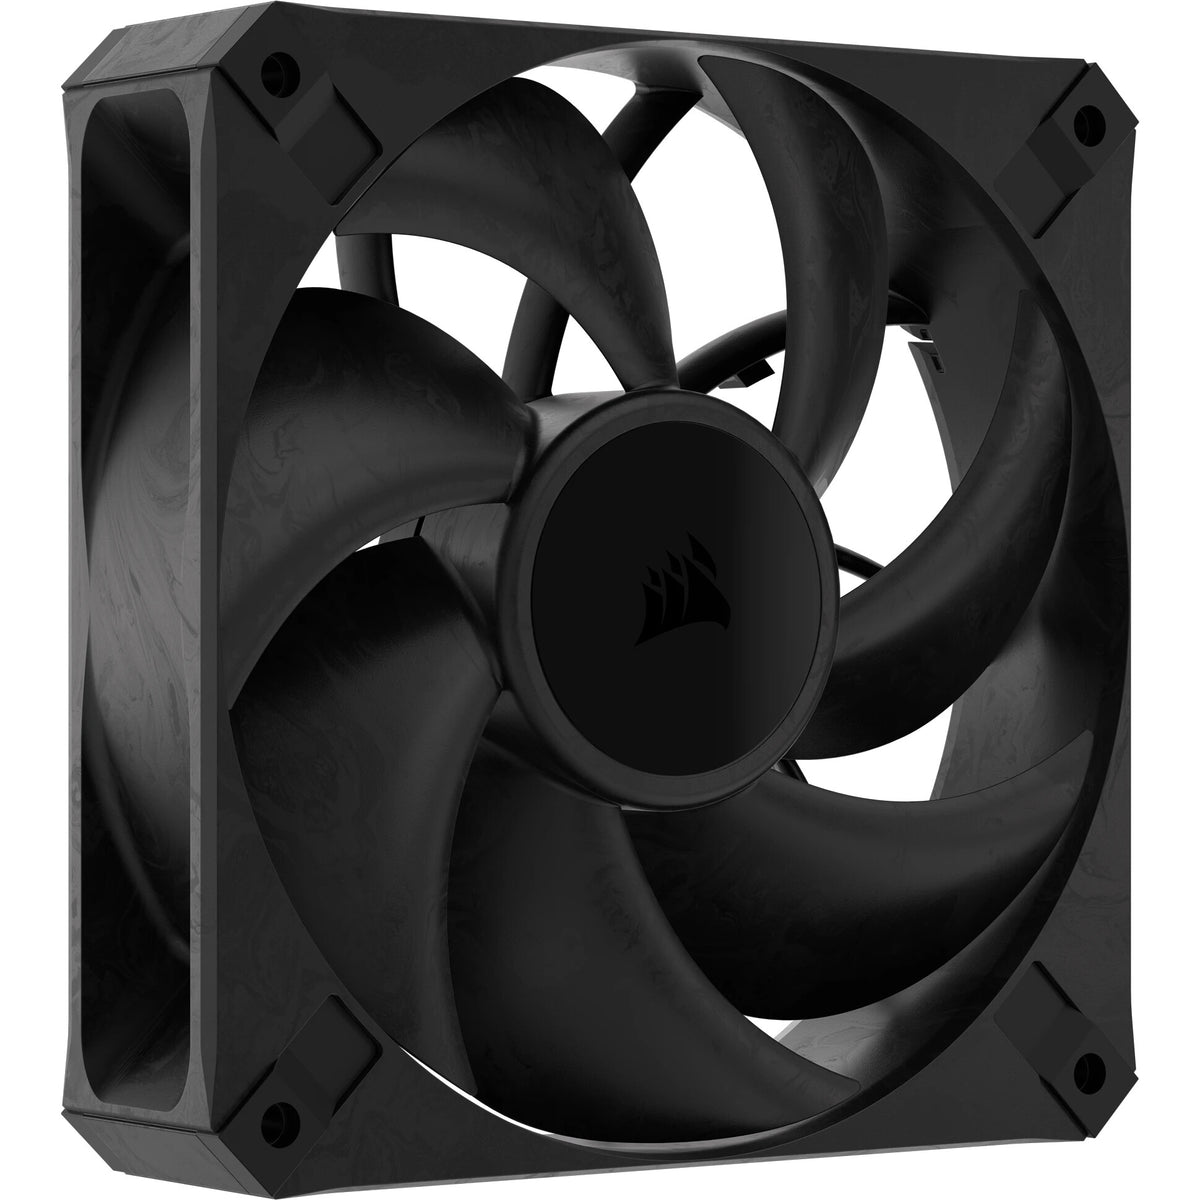 Corsair RS120 MAX - Computer Case Fan in Black - 120mm